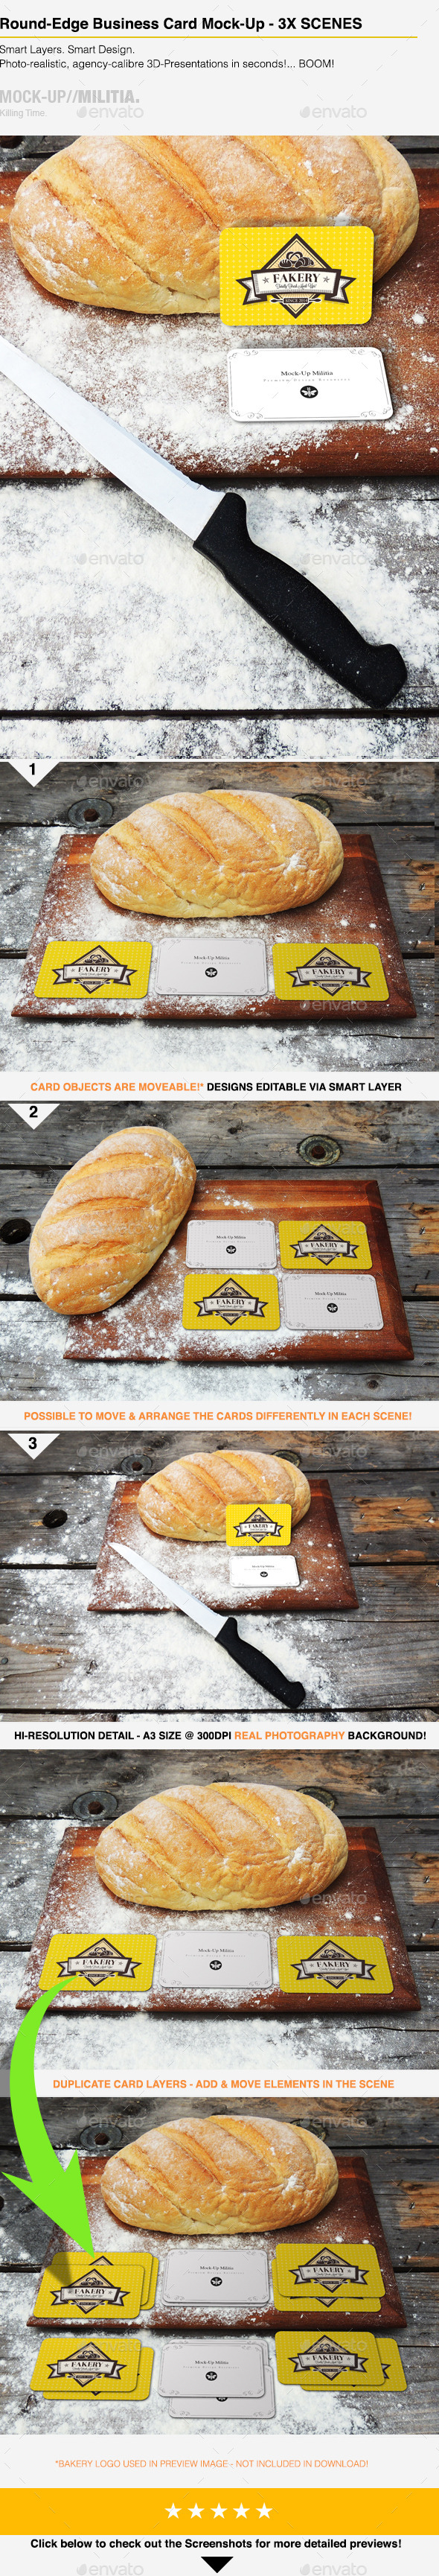 MM-Bakery-Business-Card-Mock-Up-85mmx55mm-6mm-Rounded-Corners-Prvw.jpg